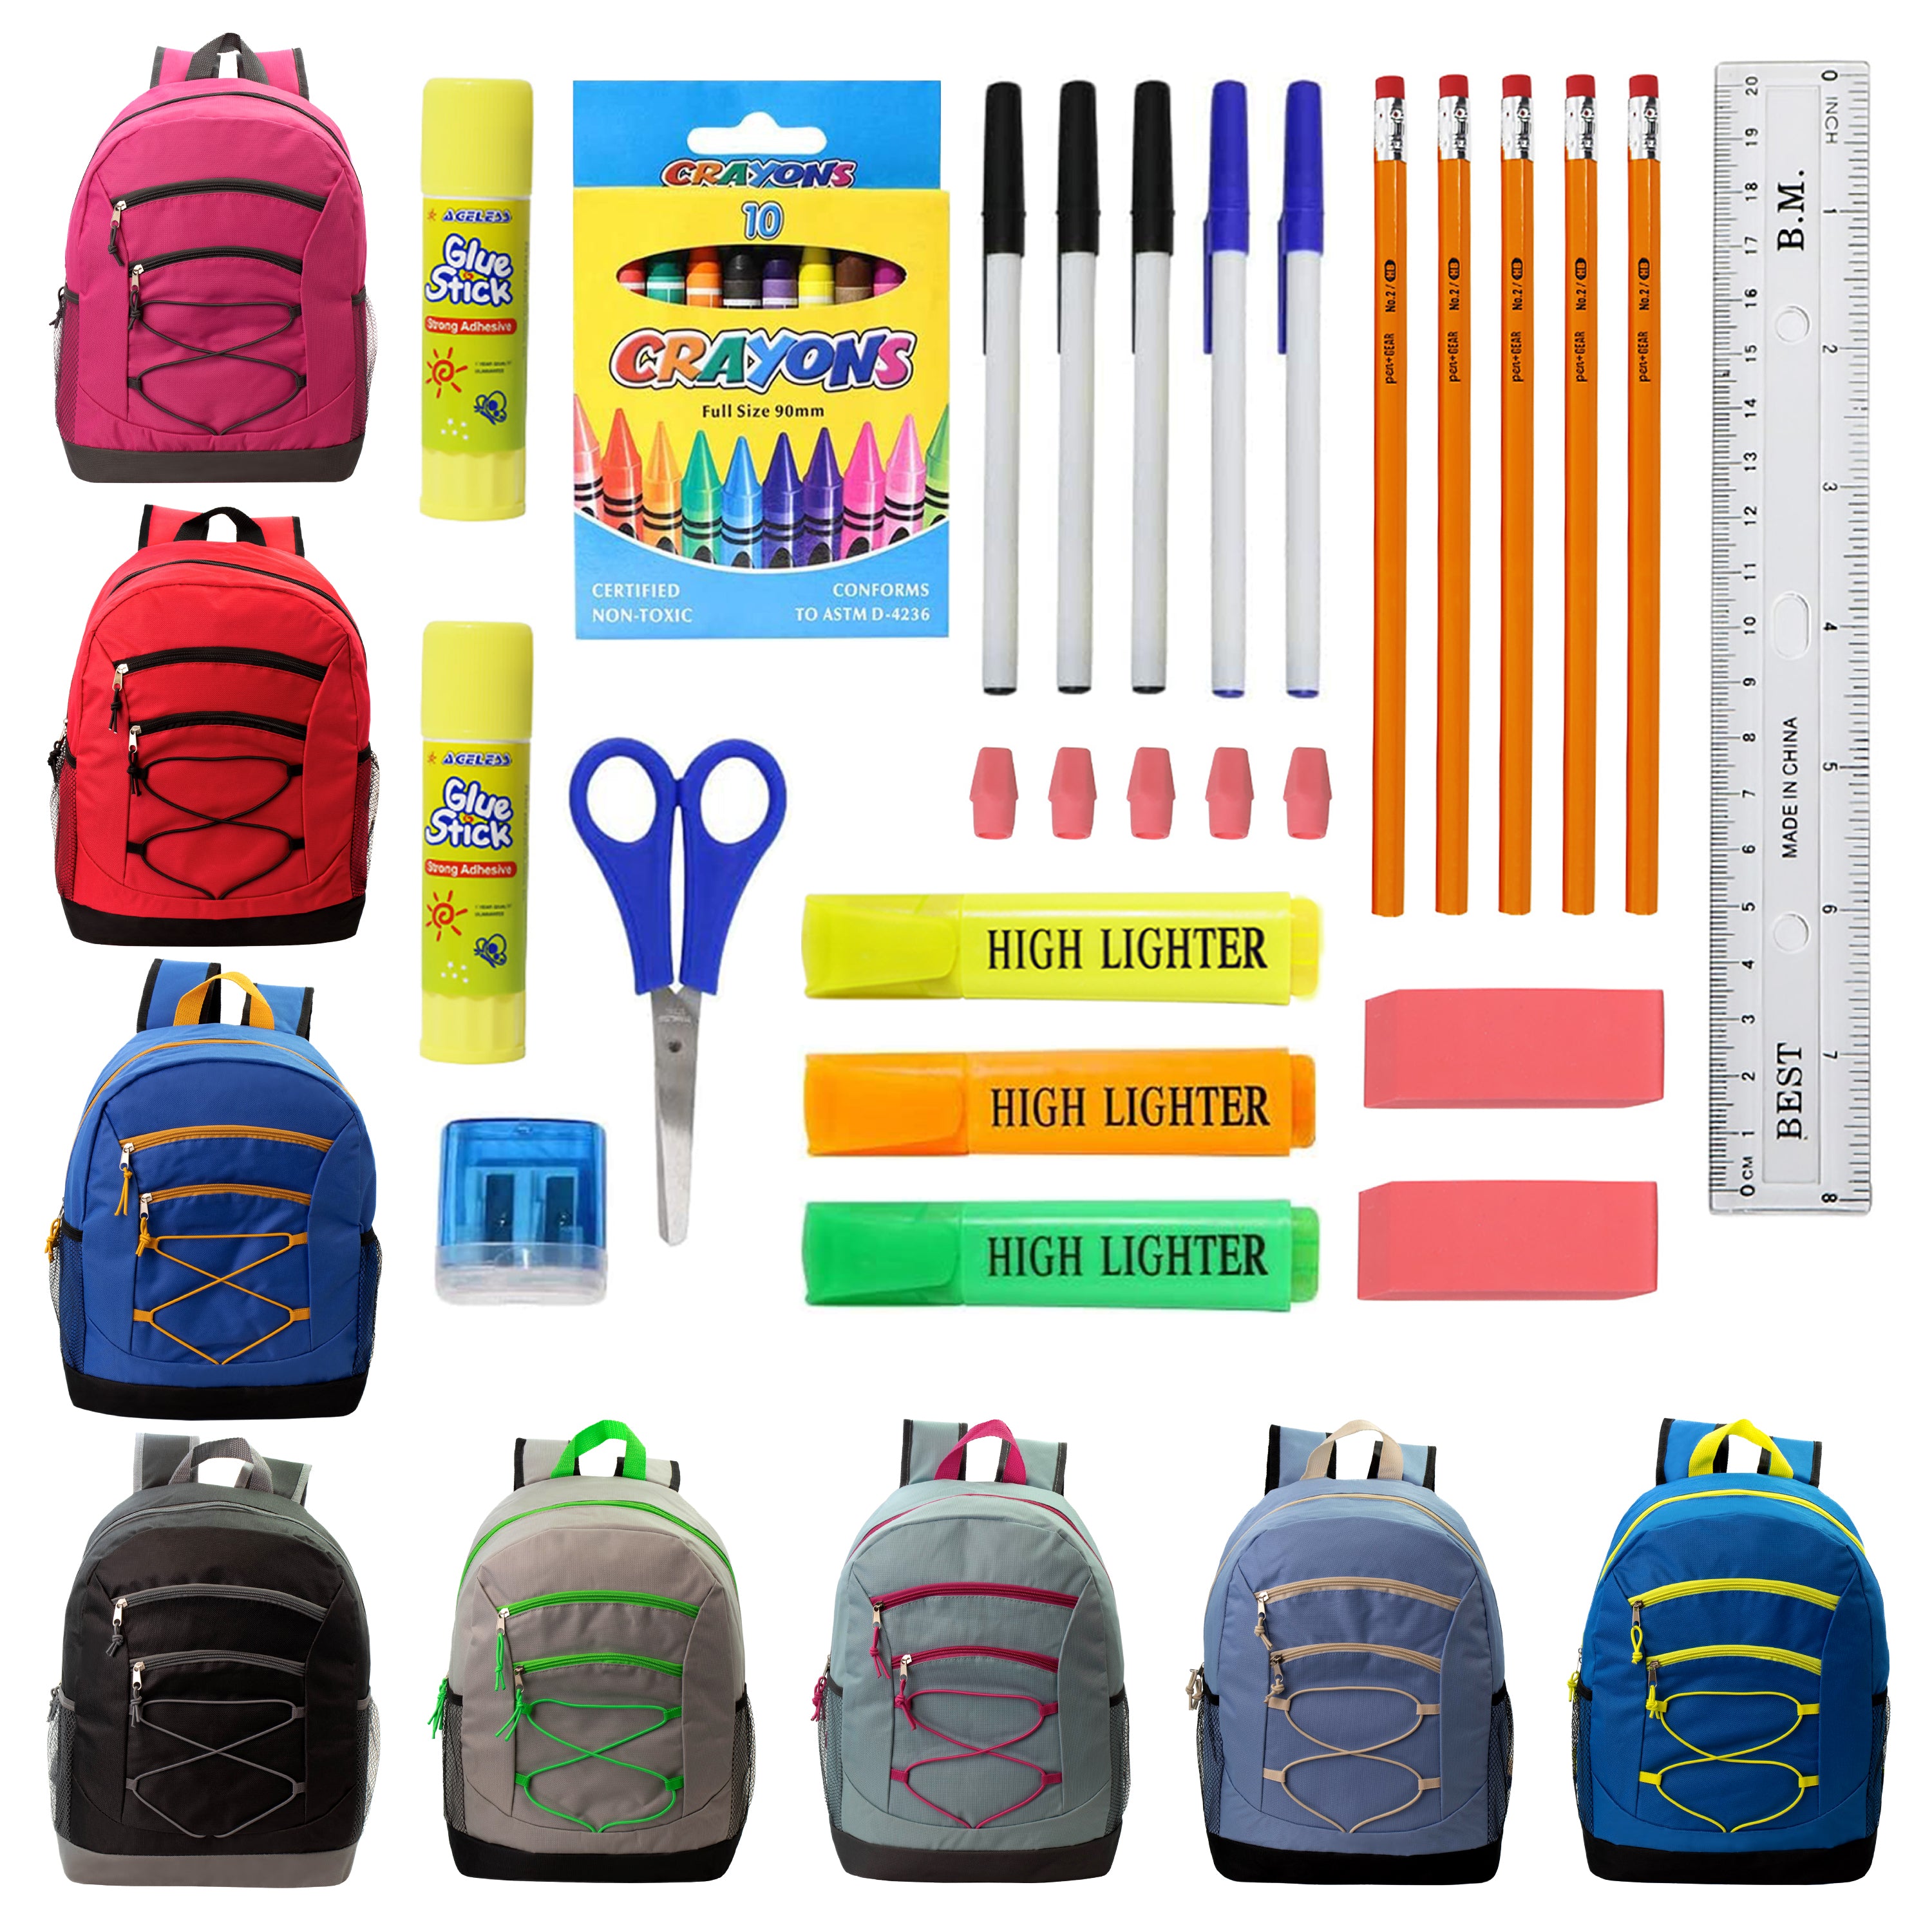 17 Inch Bulk Backpacks in Assorted Designs with School Supply Kits Wholesale - Kit of 12